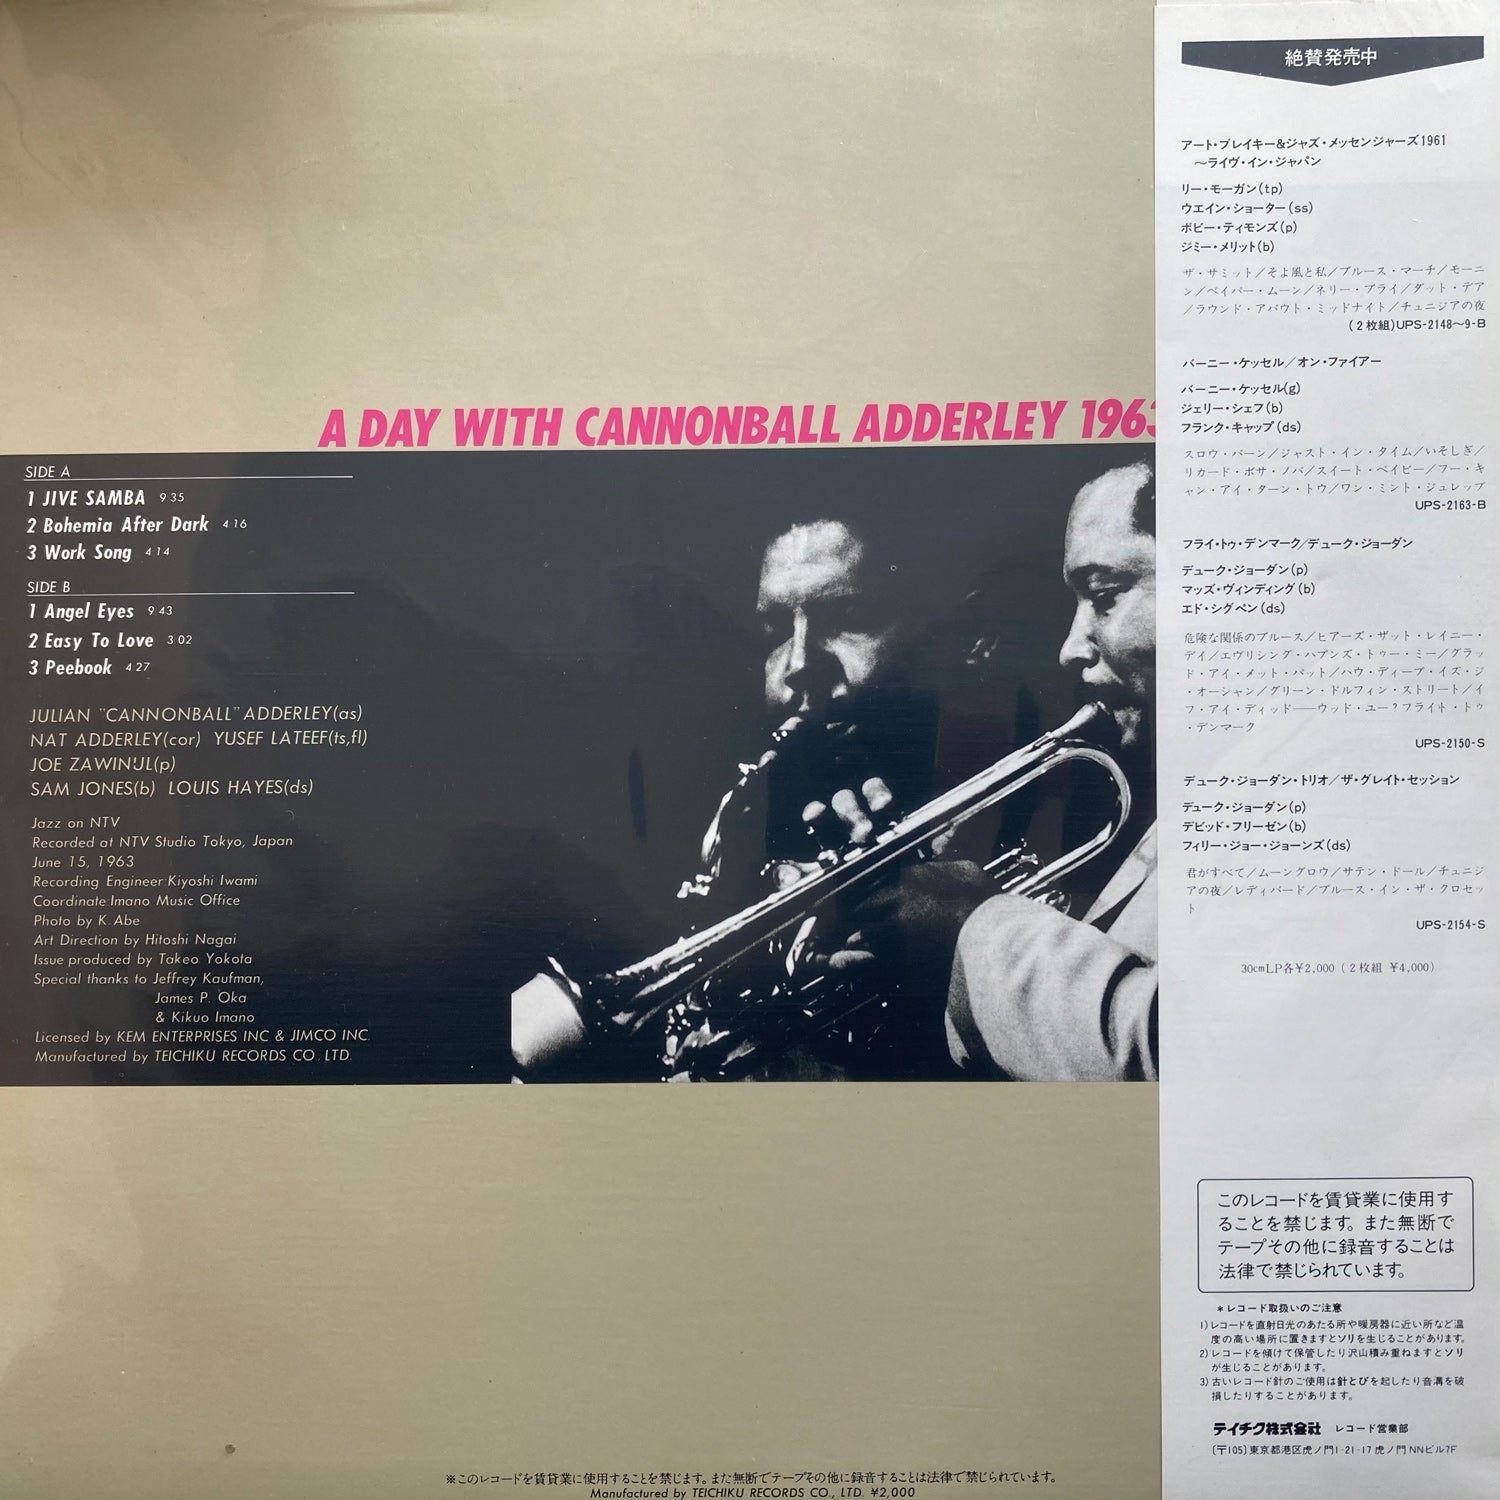 Cannonball Adderley - A Day With Cannonball Adderley 1963